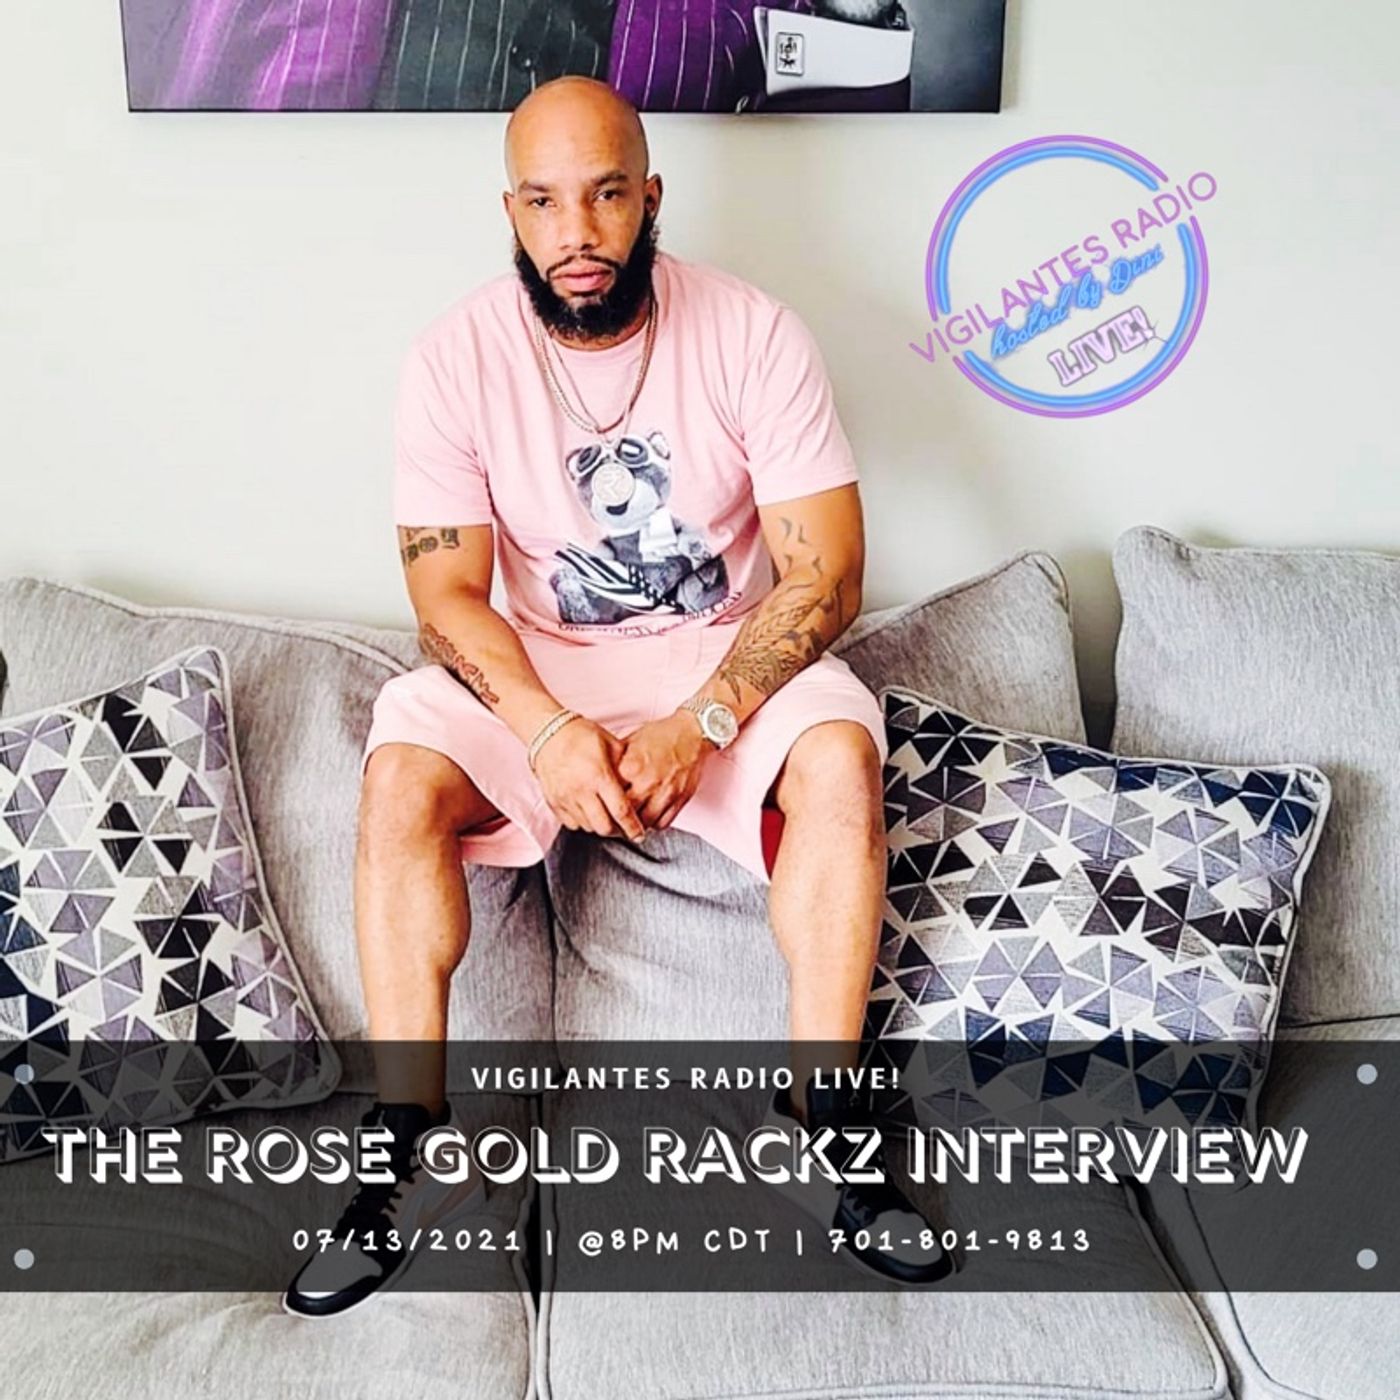 The Rose Gold Rackz Interview. Image